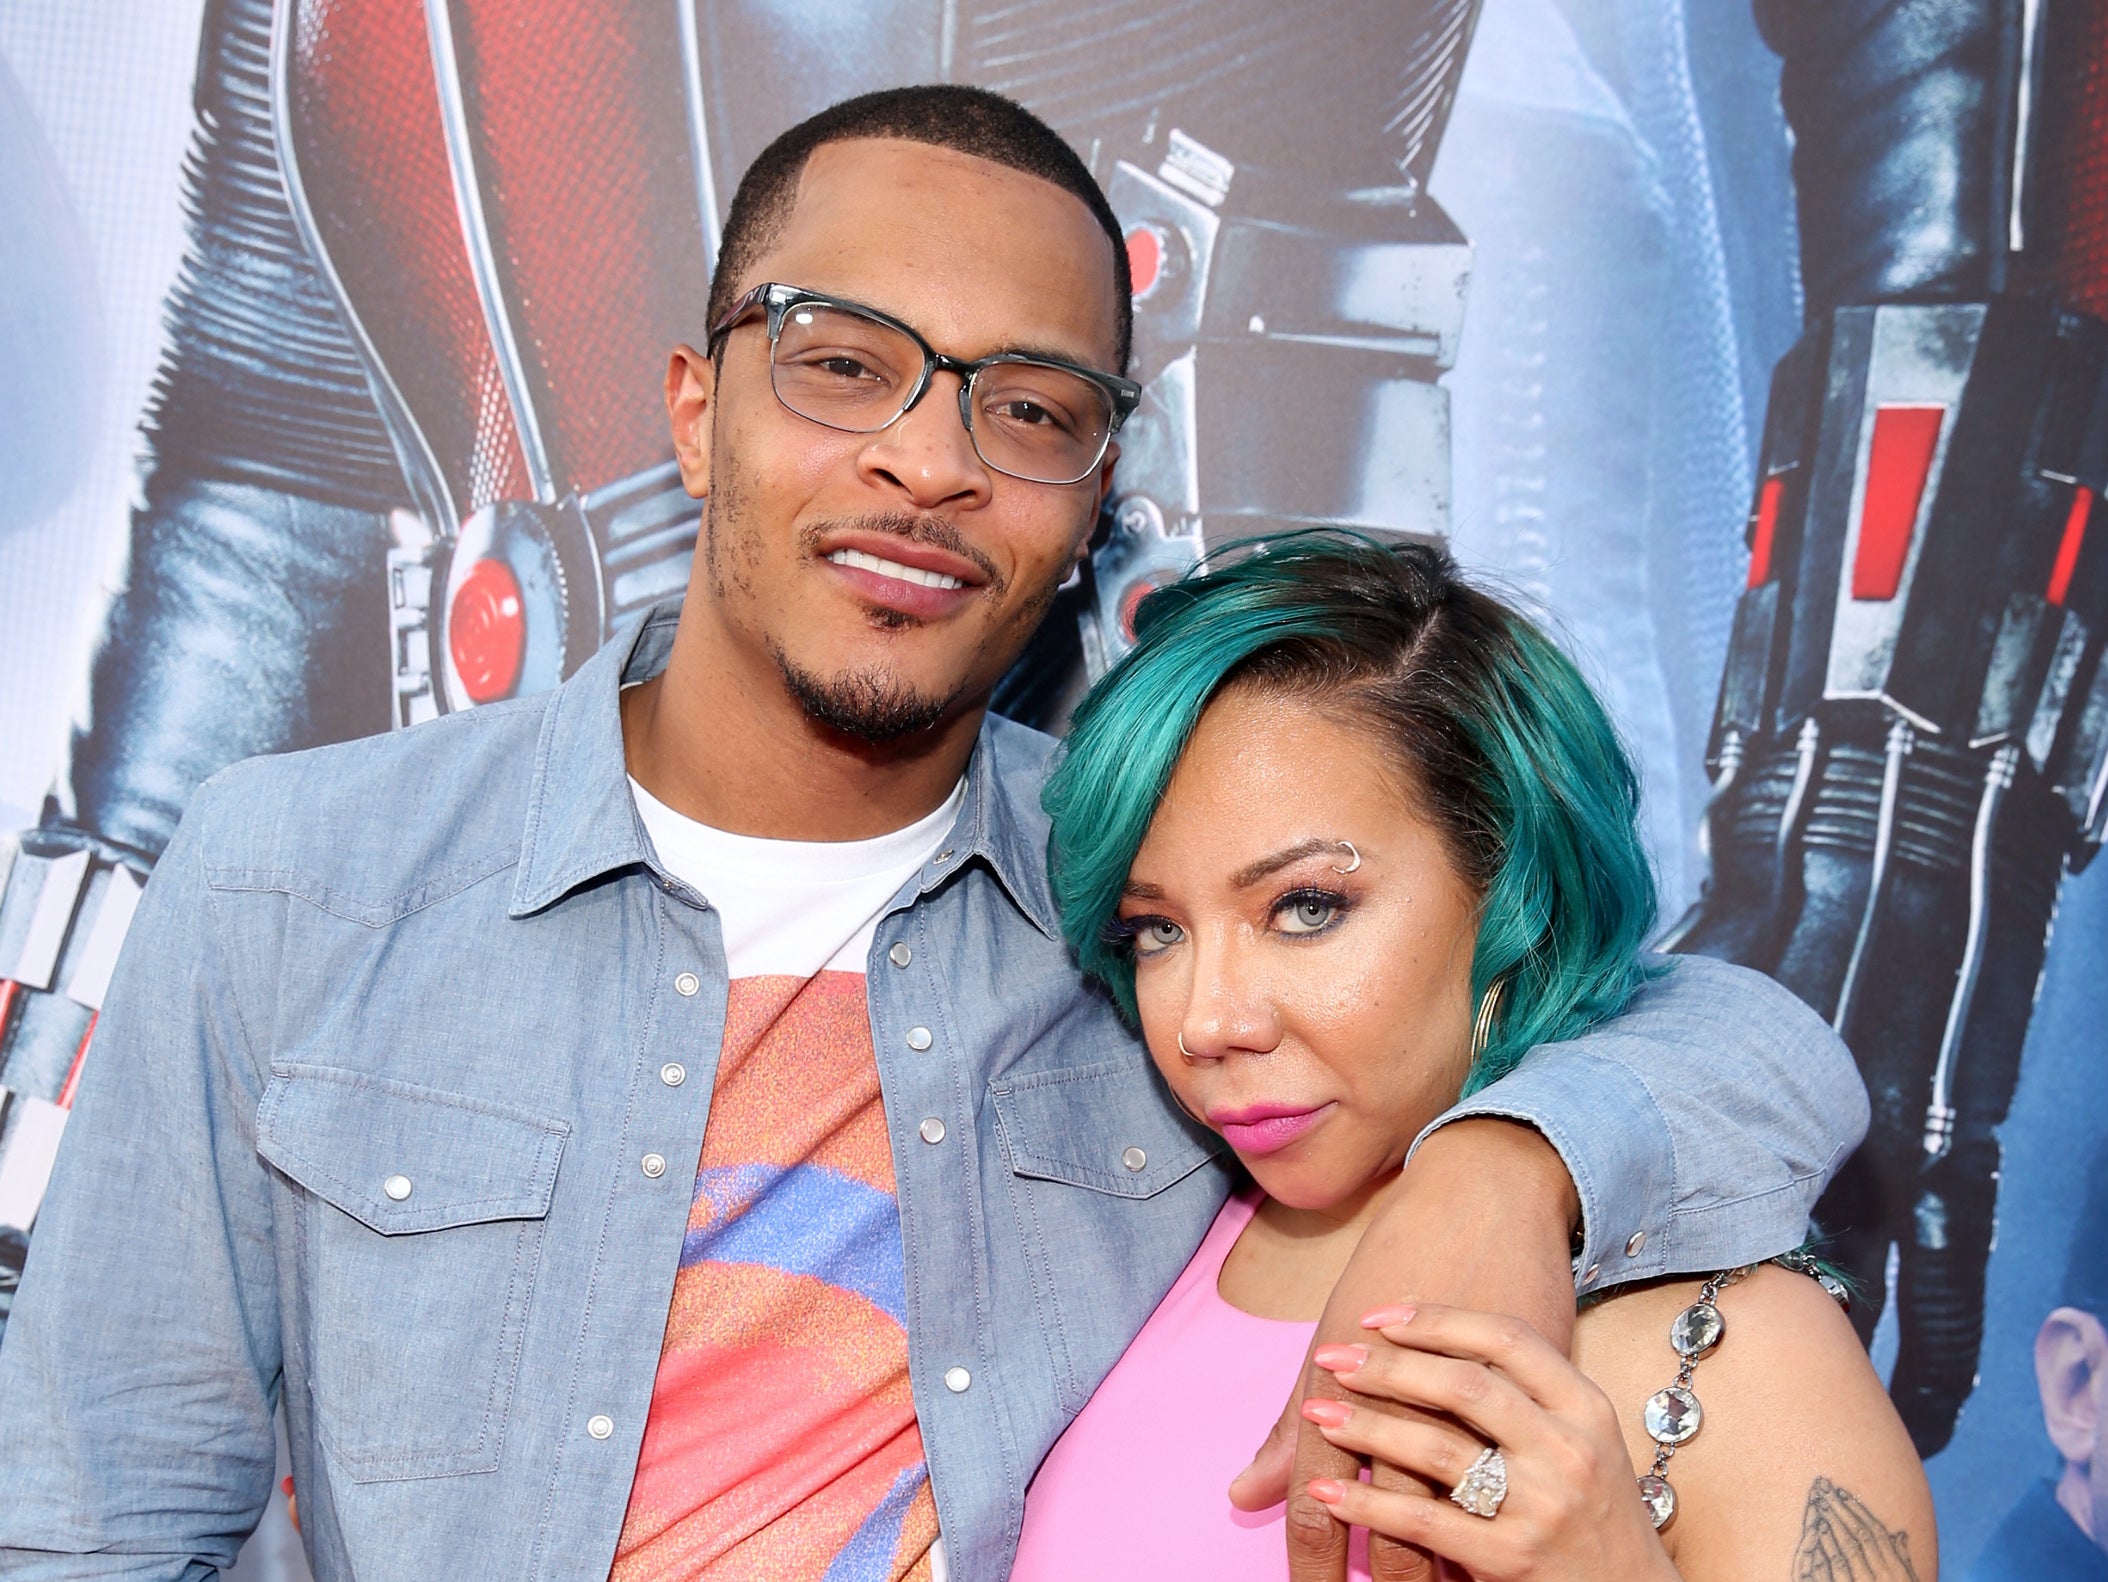 TI and his wife Tiny